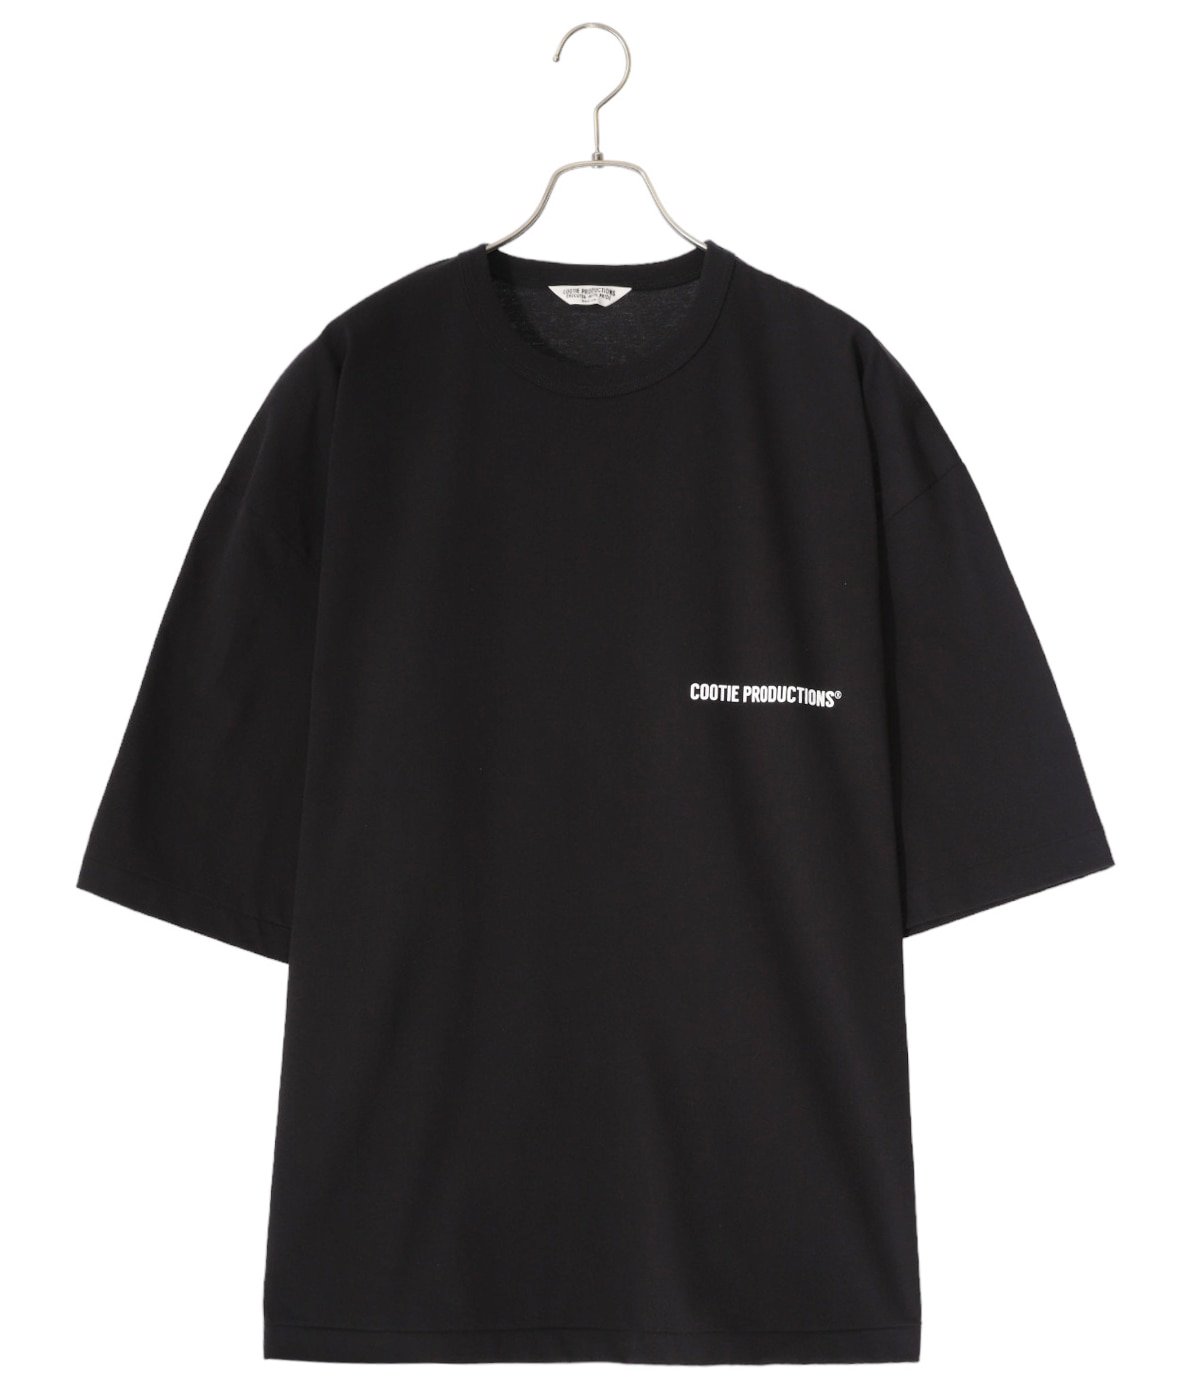 Print Oversized S/S Tee | COOTIE PRODUCTIONS(クーティー 